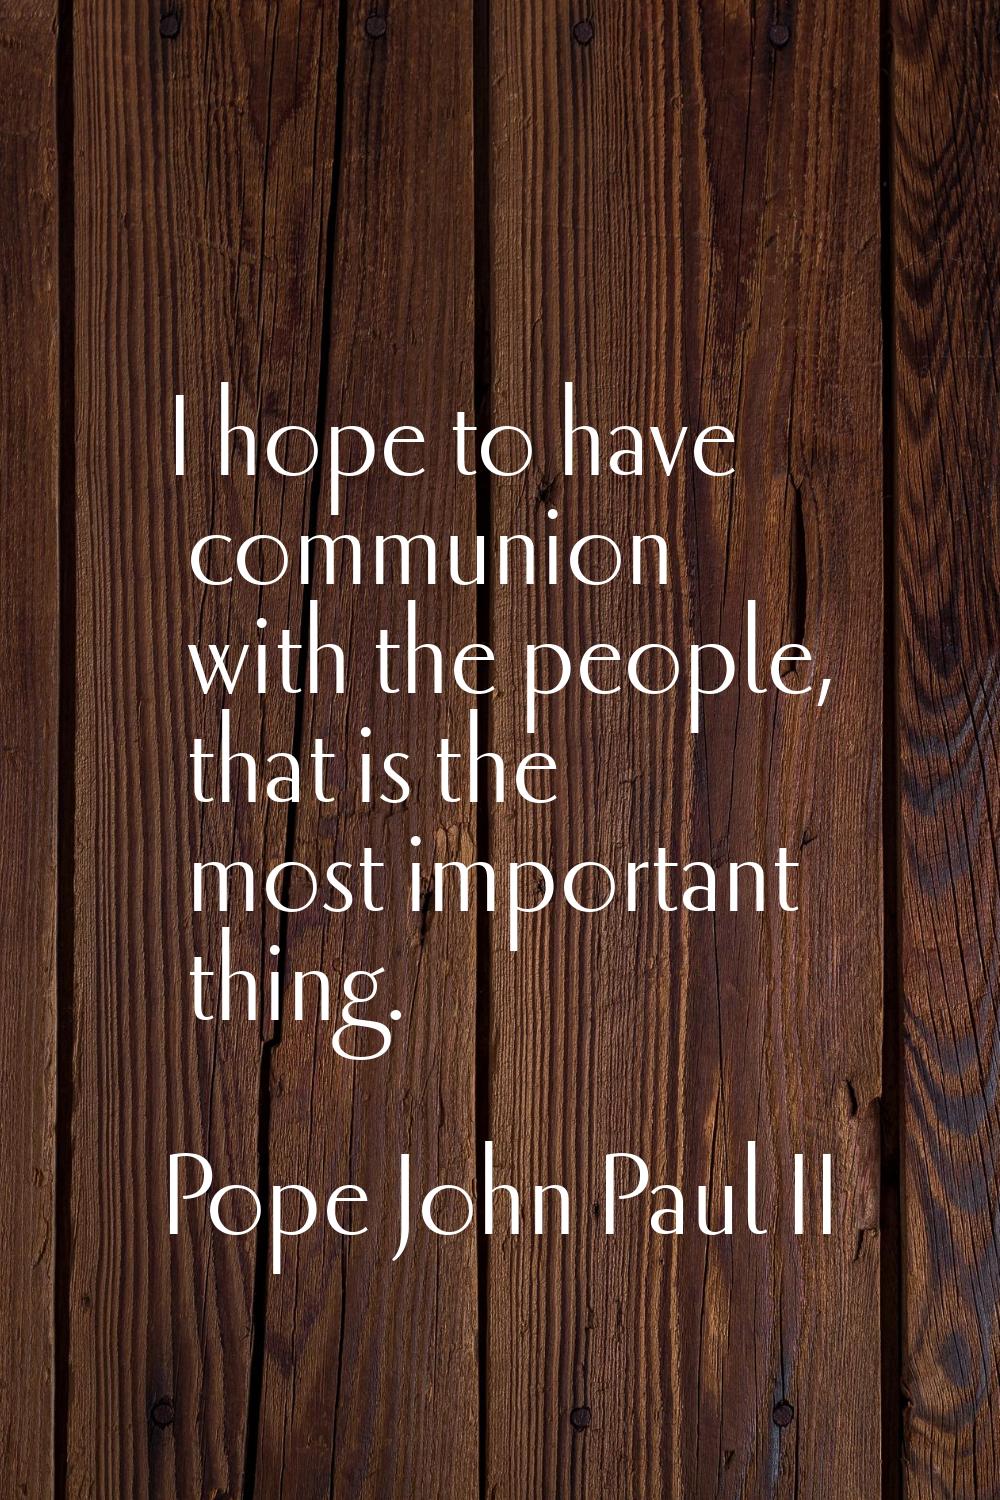 I hope to have communion with the people, that is the most important thing.